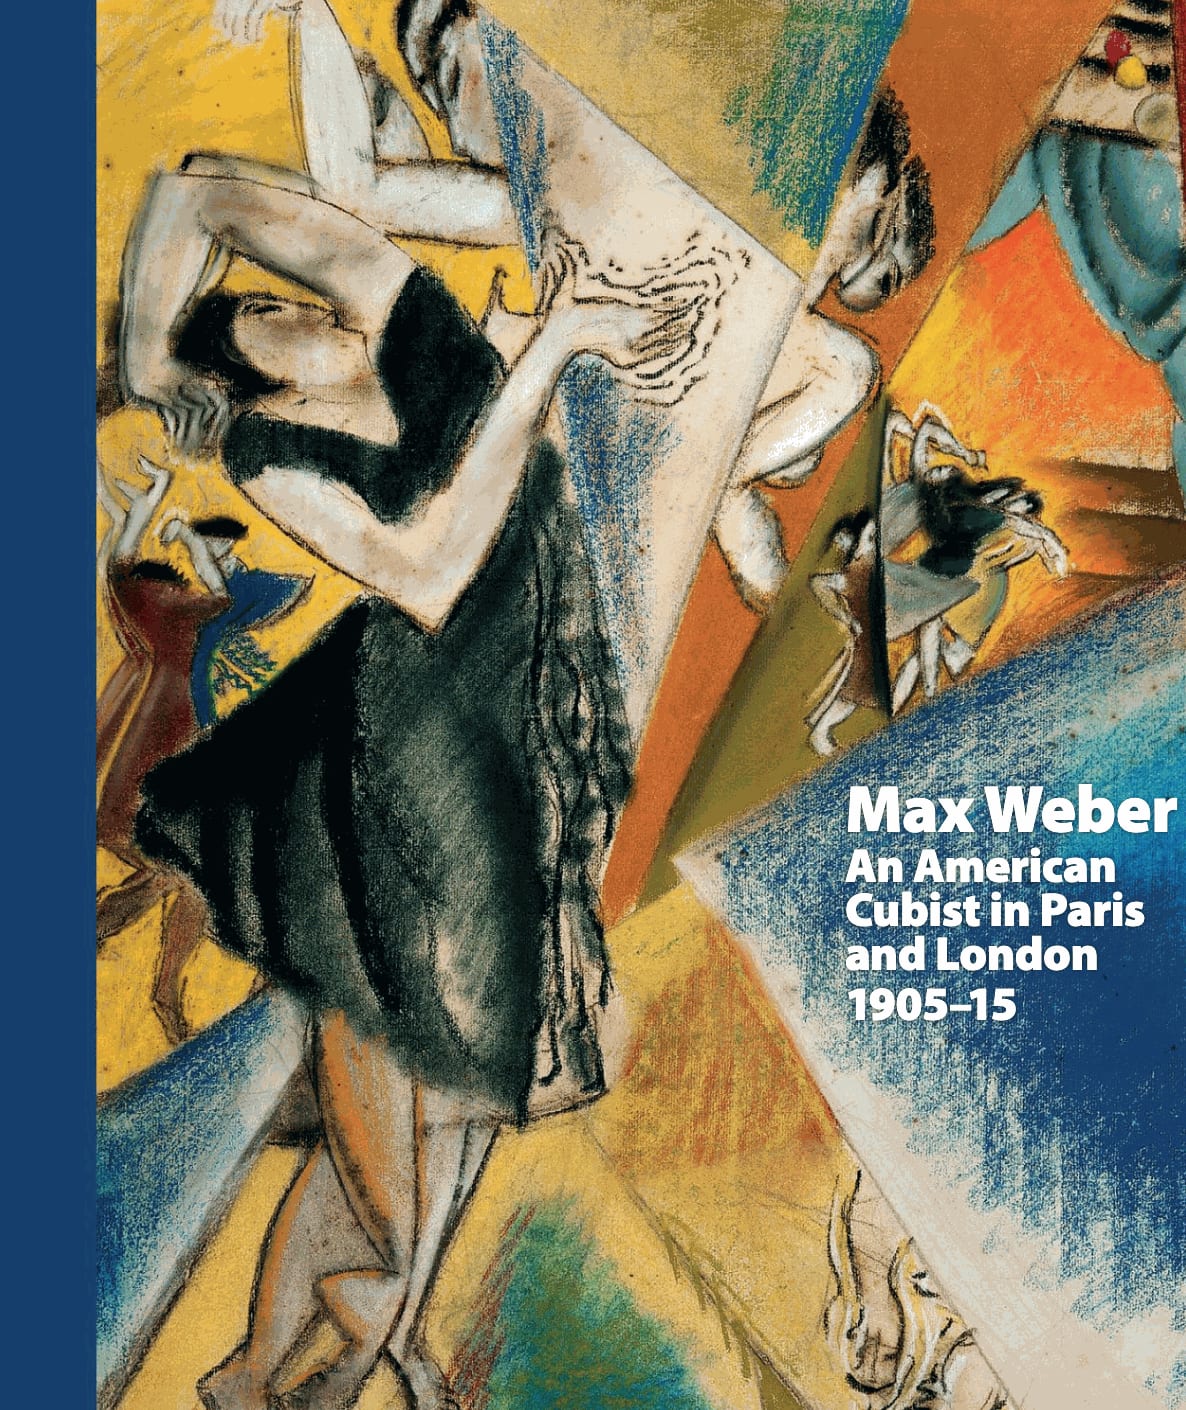 Max Weber: An American Cubist in Paris and London Read it here